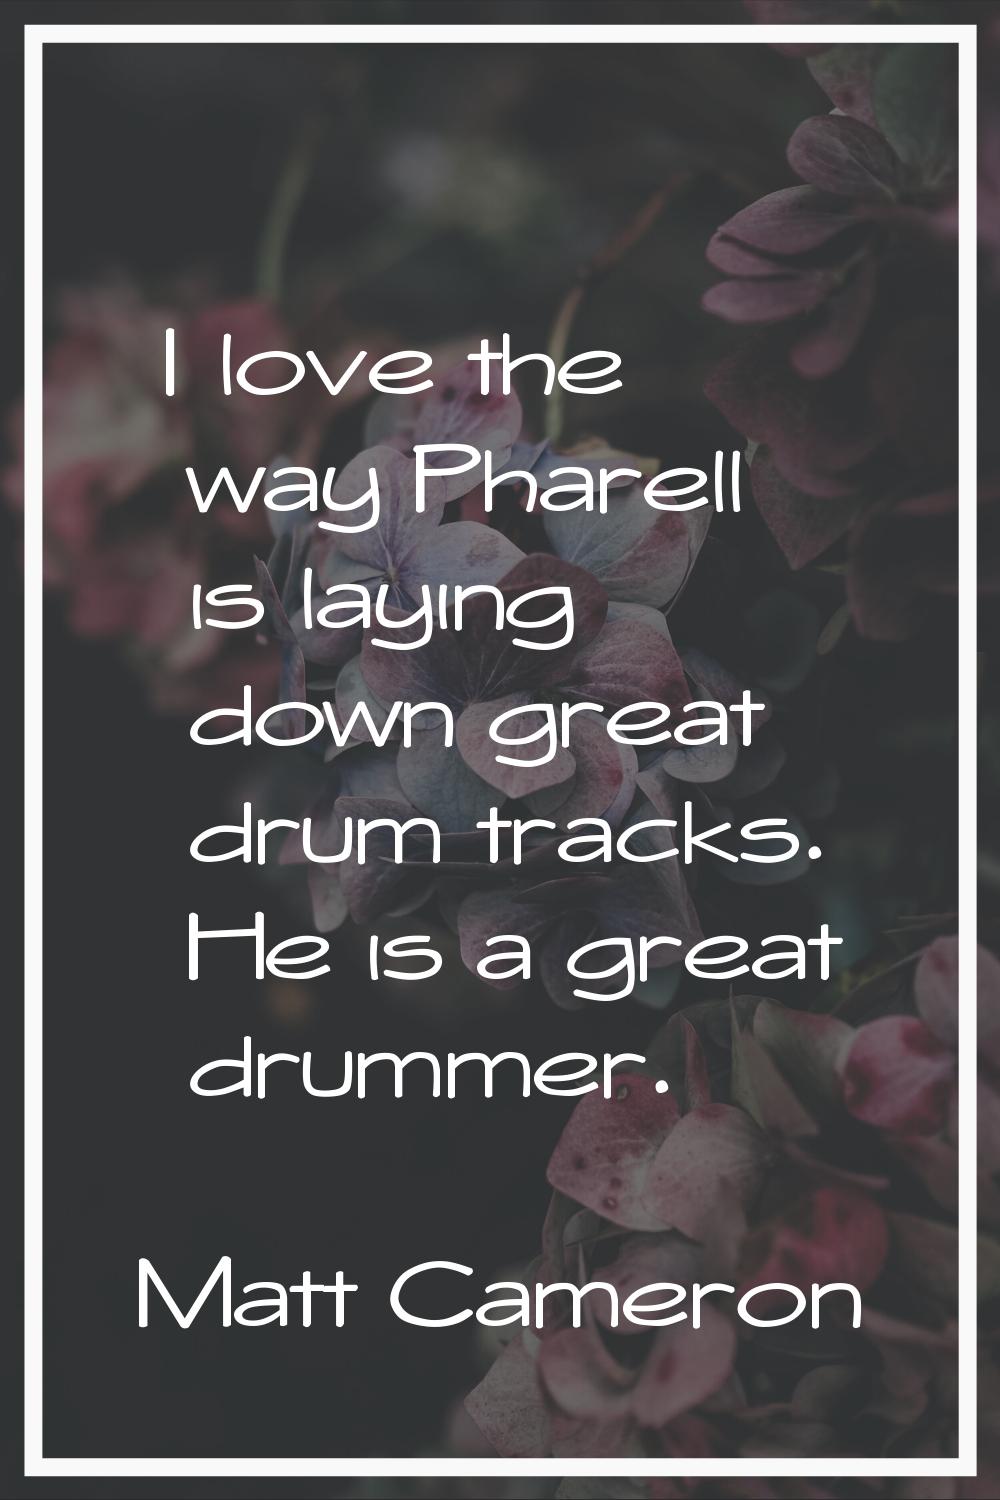 I love the way Pharell is laying down great drum tracks. He is a great drummer.